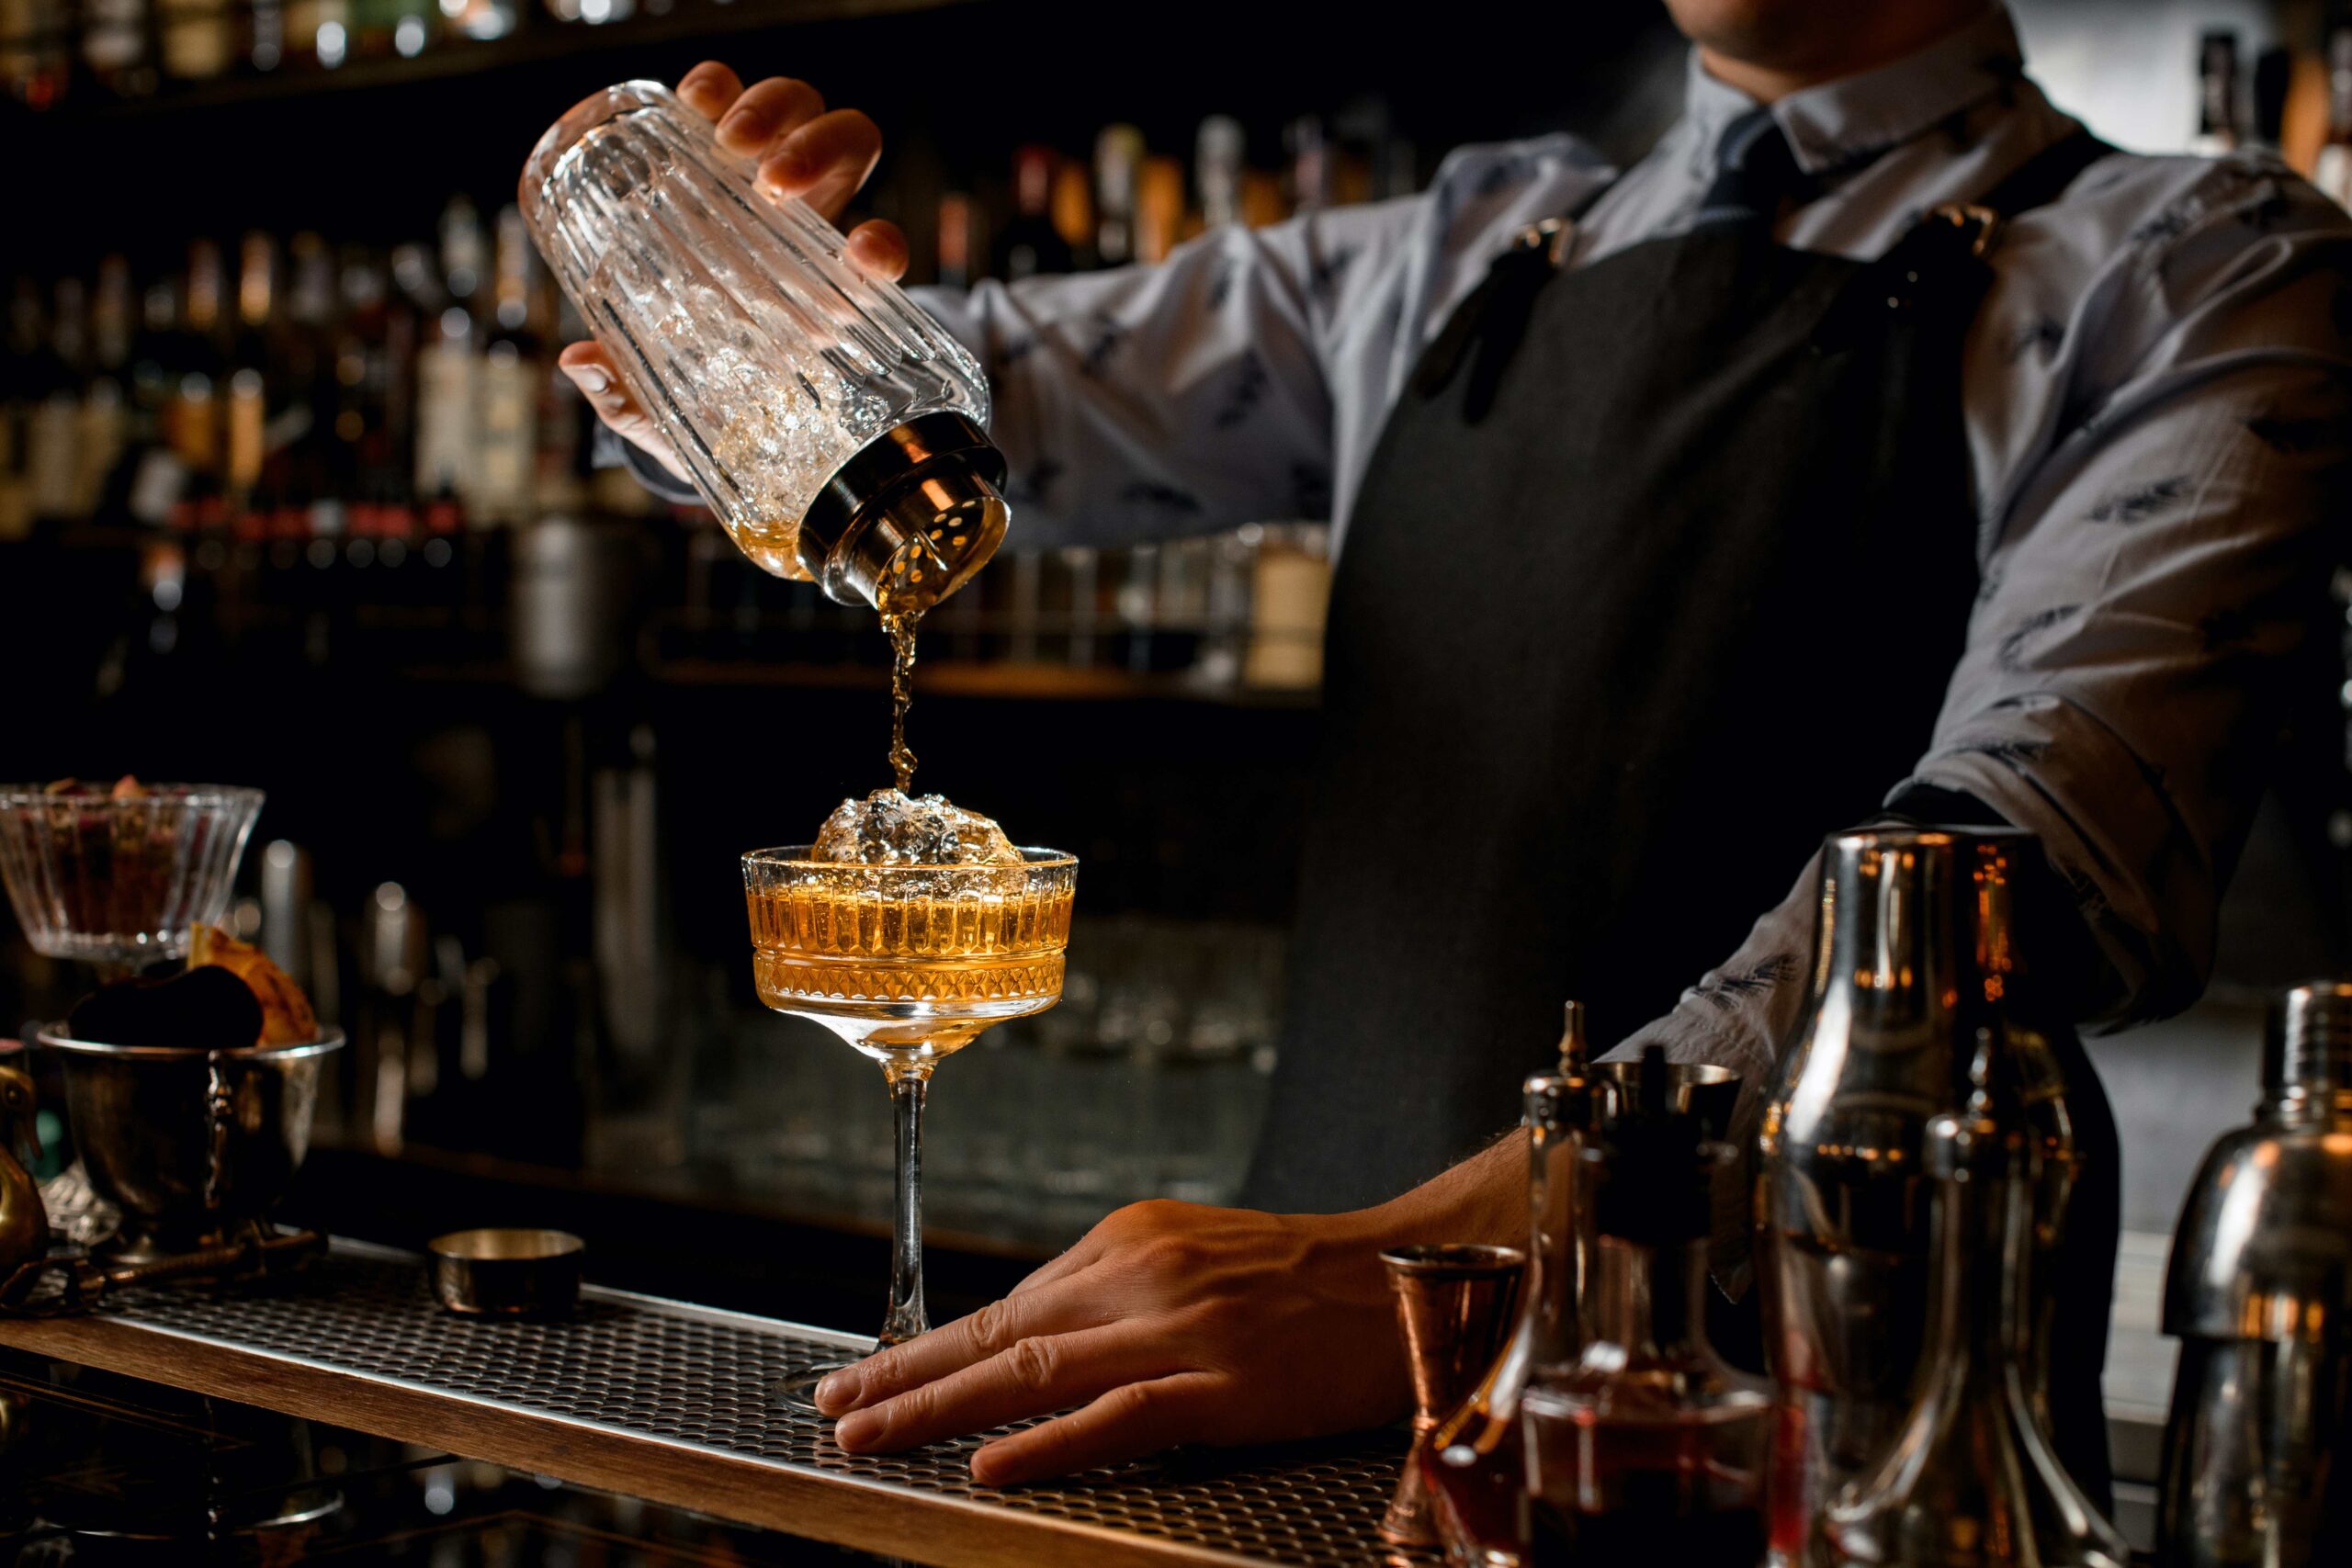 Professional bartender in black apron pours brown drink from shaker into glass